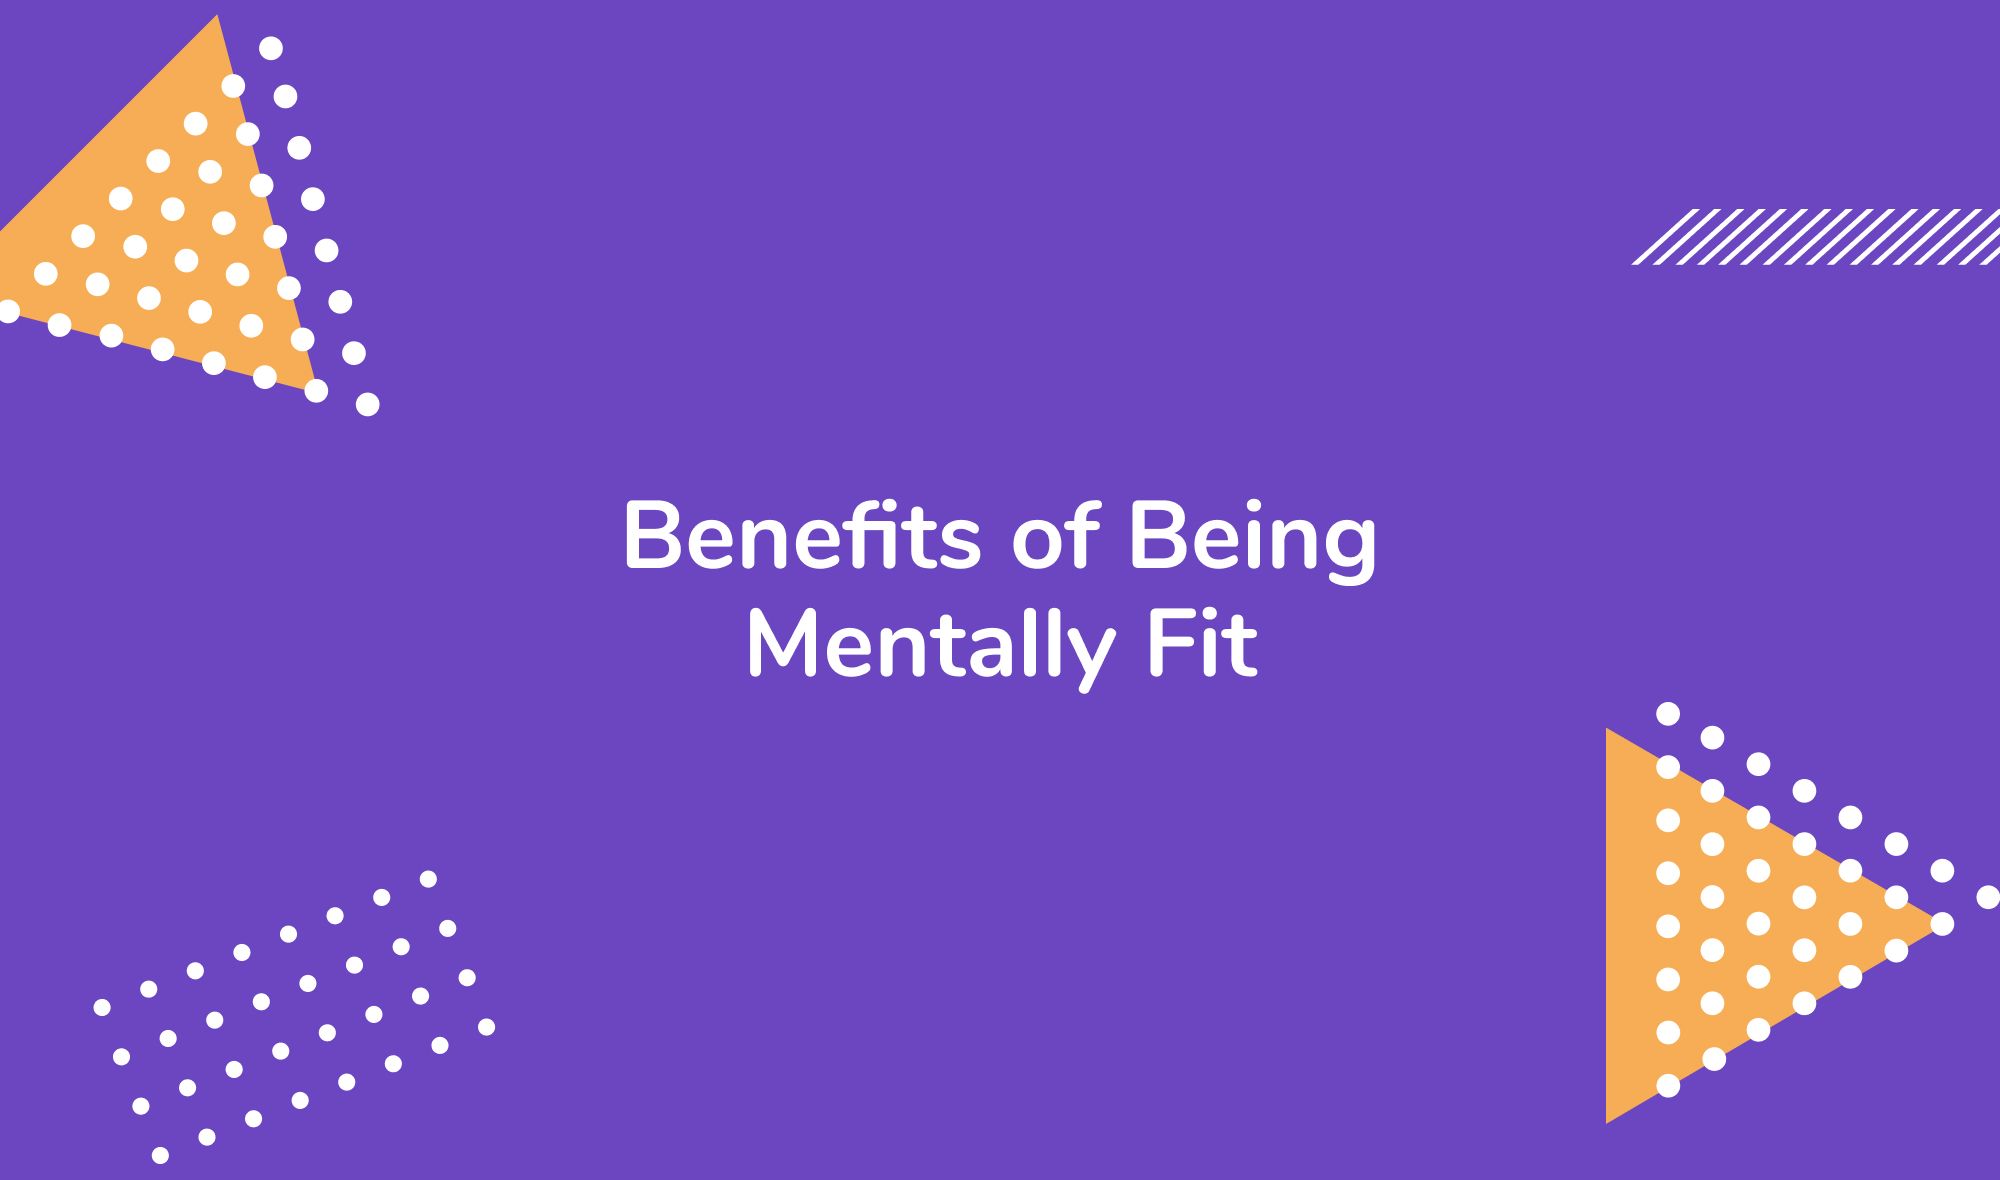 Benefits of Being Mentally Fit